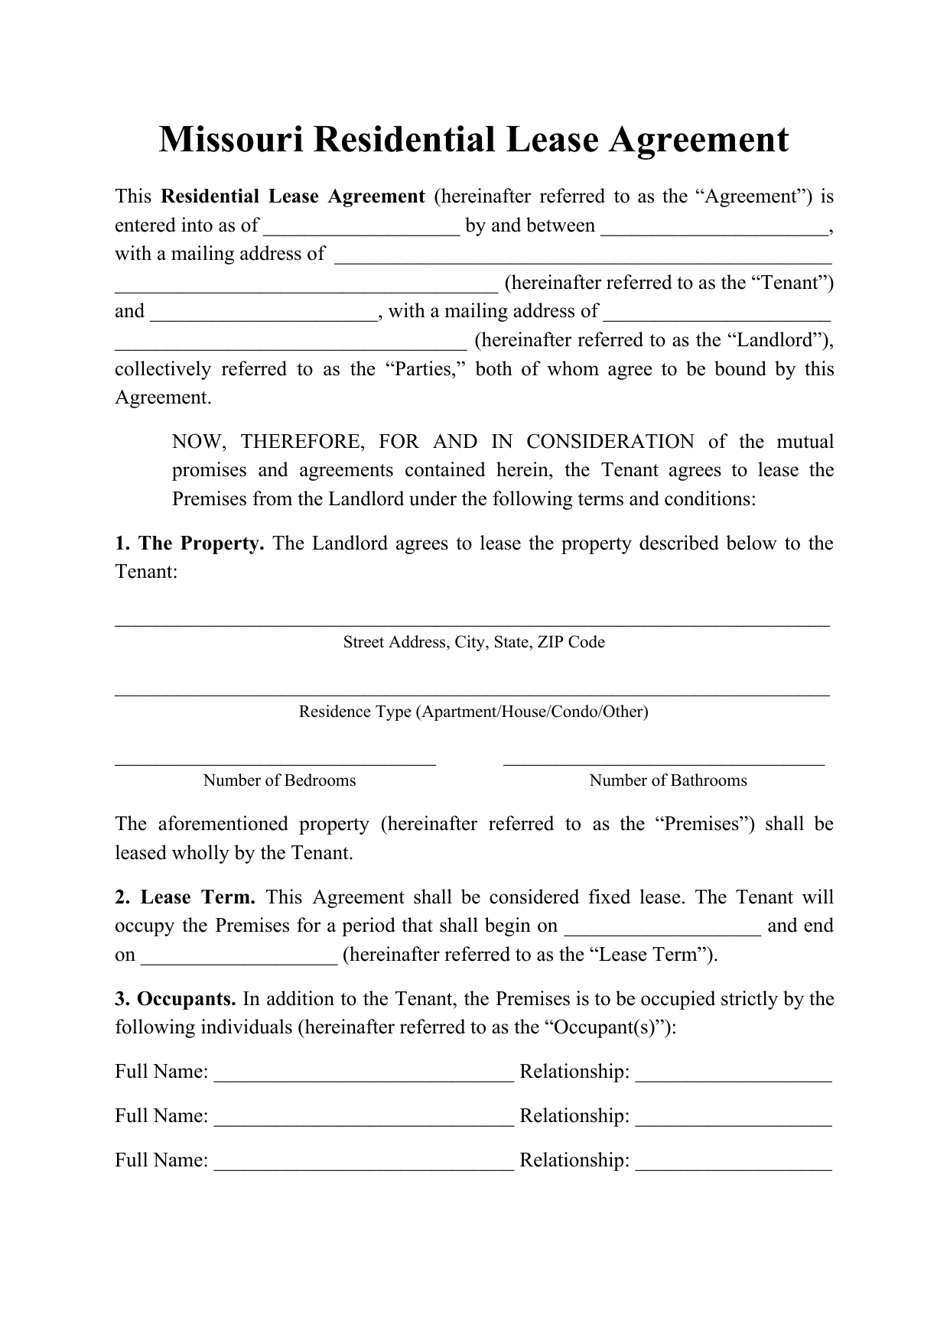 Missouri Residential Lease Agreement Template Download Printable PDF